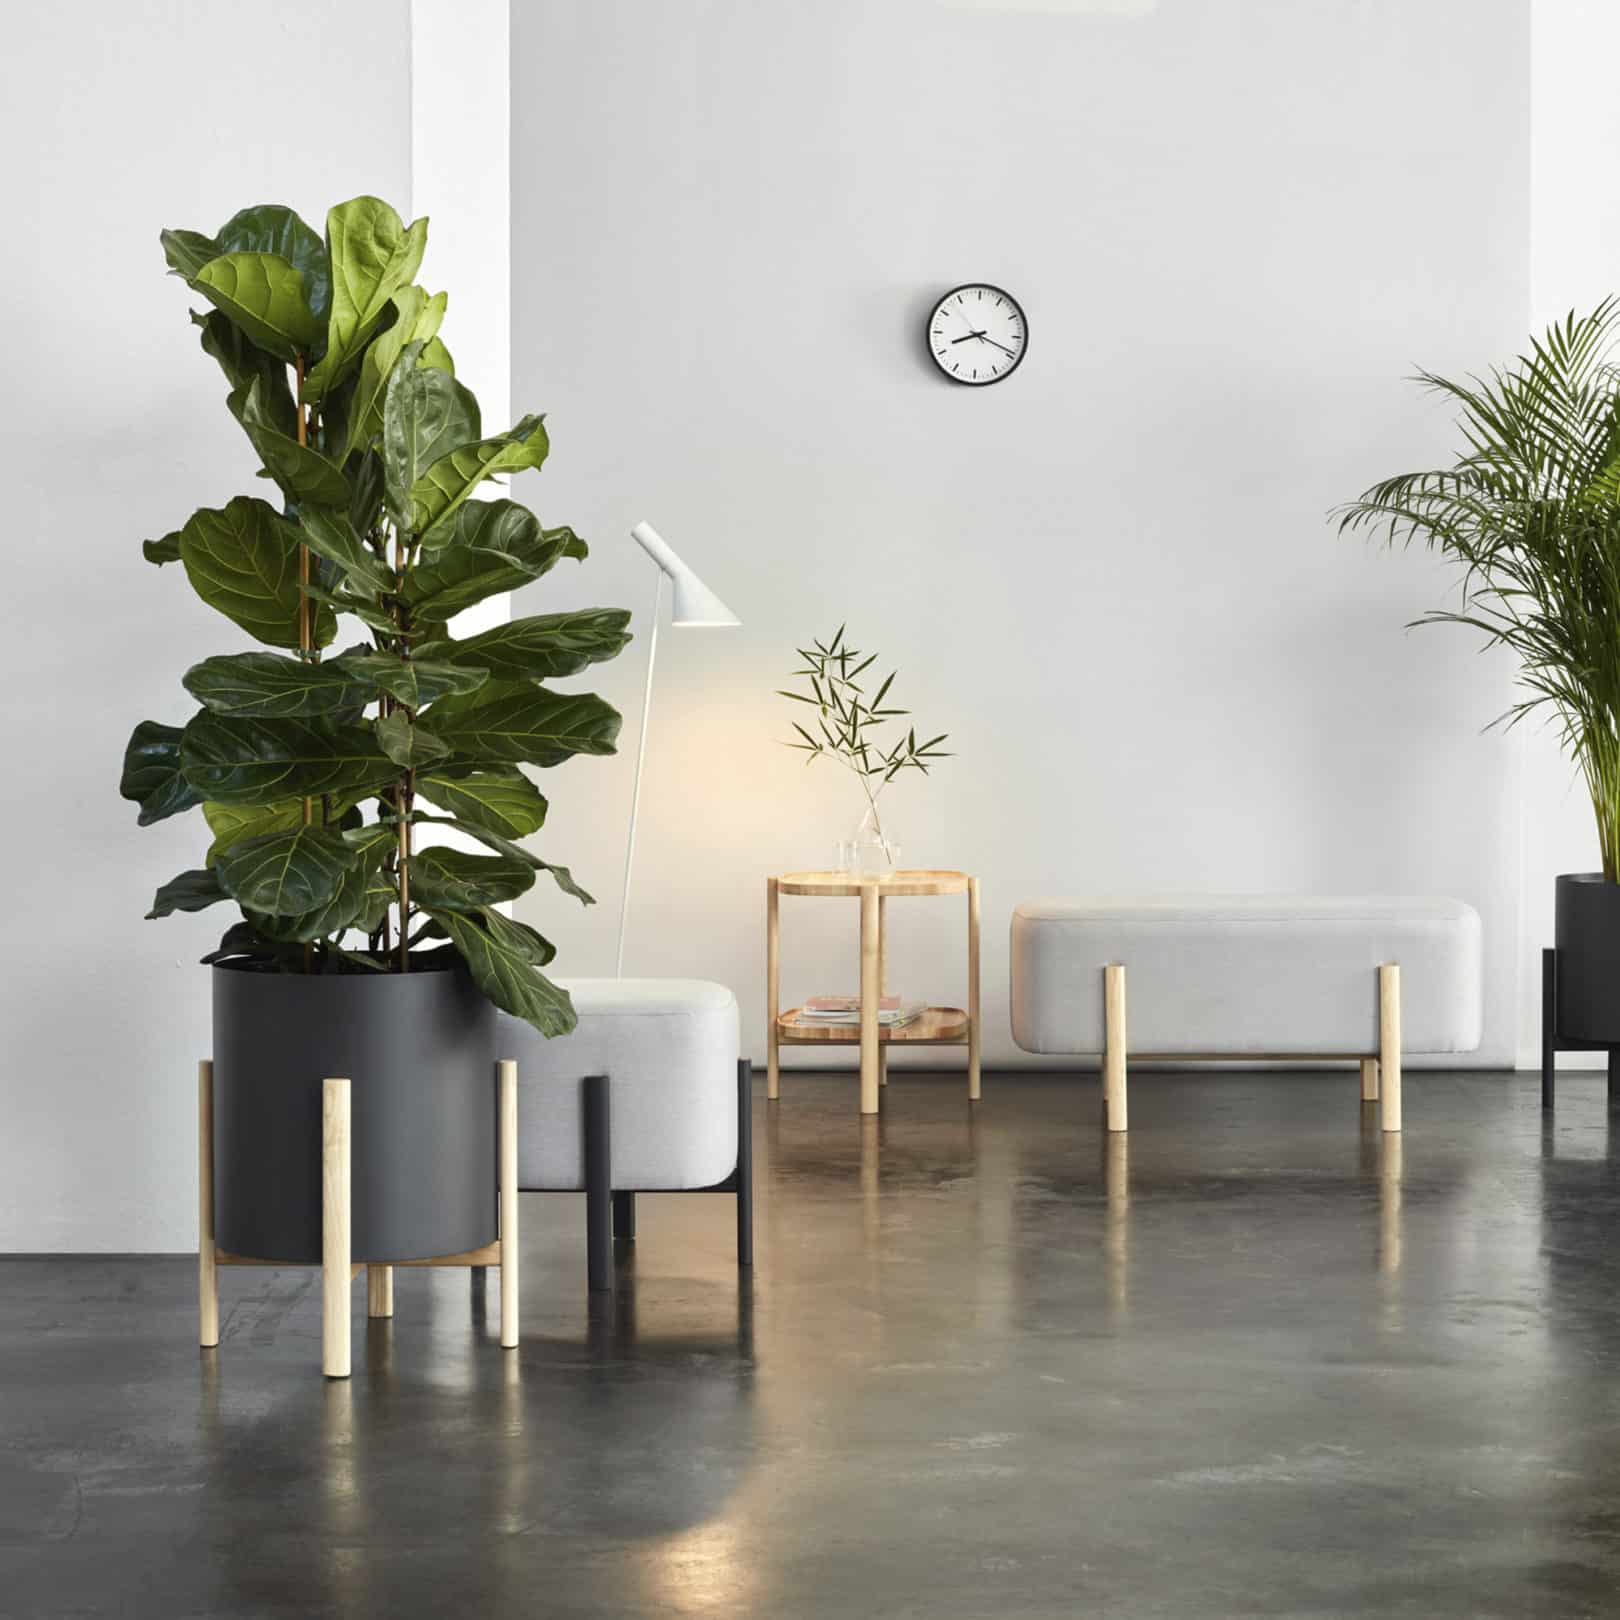 Fuse family of furniture and planters